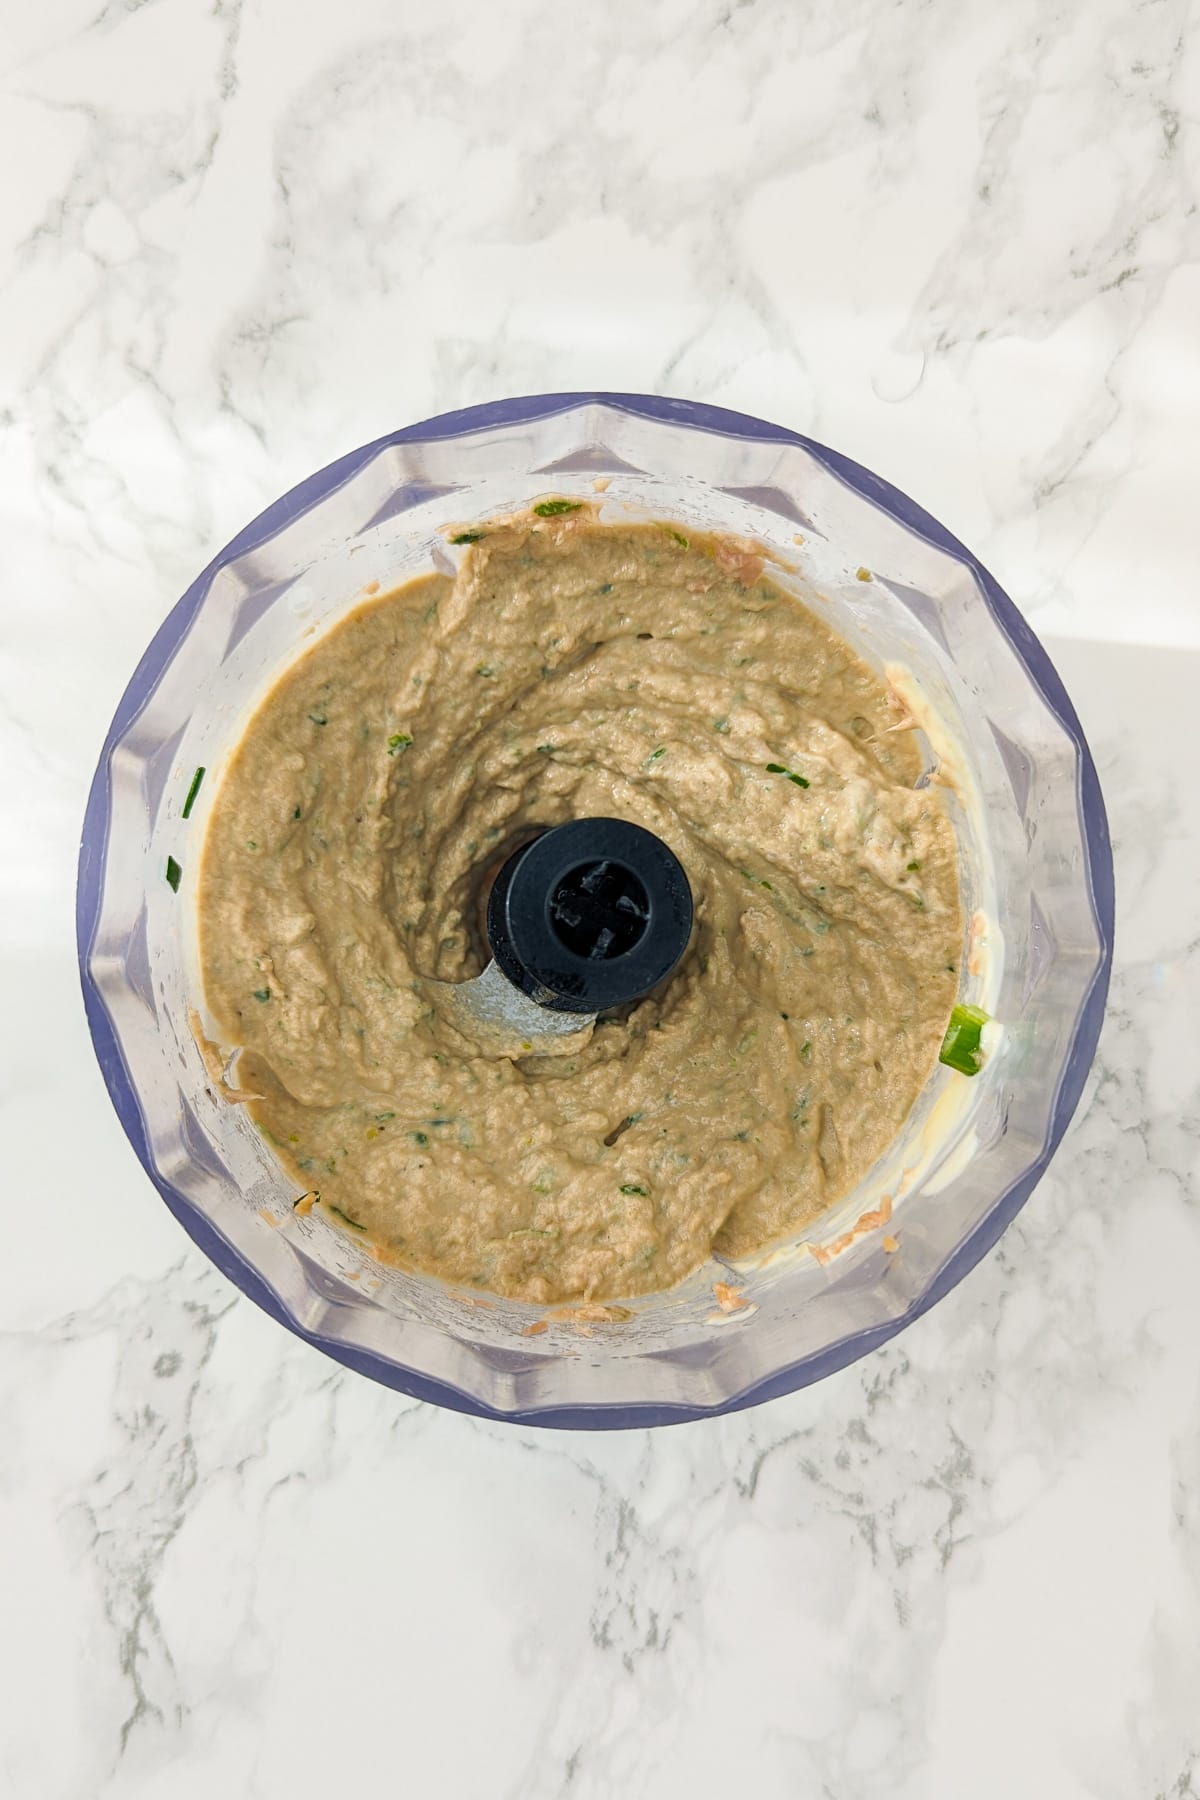 Mixing tuna spread in a table blender.